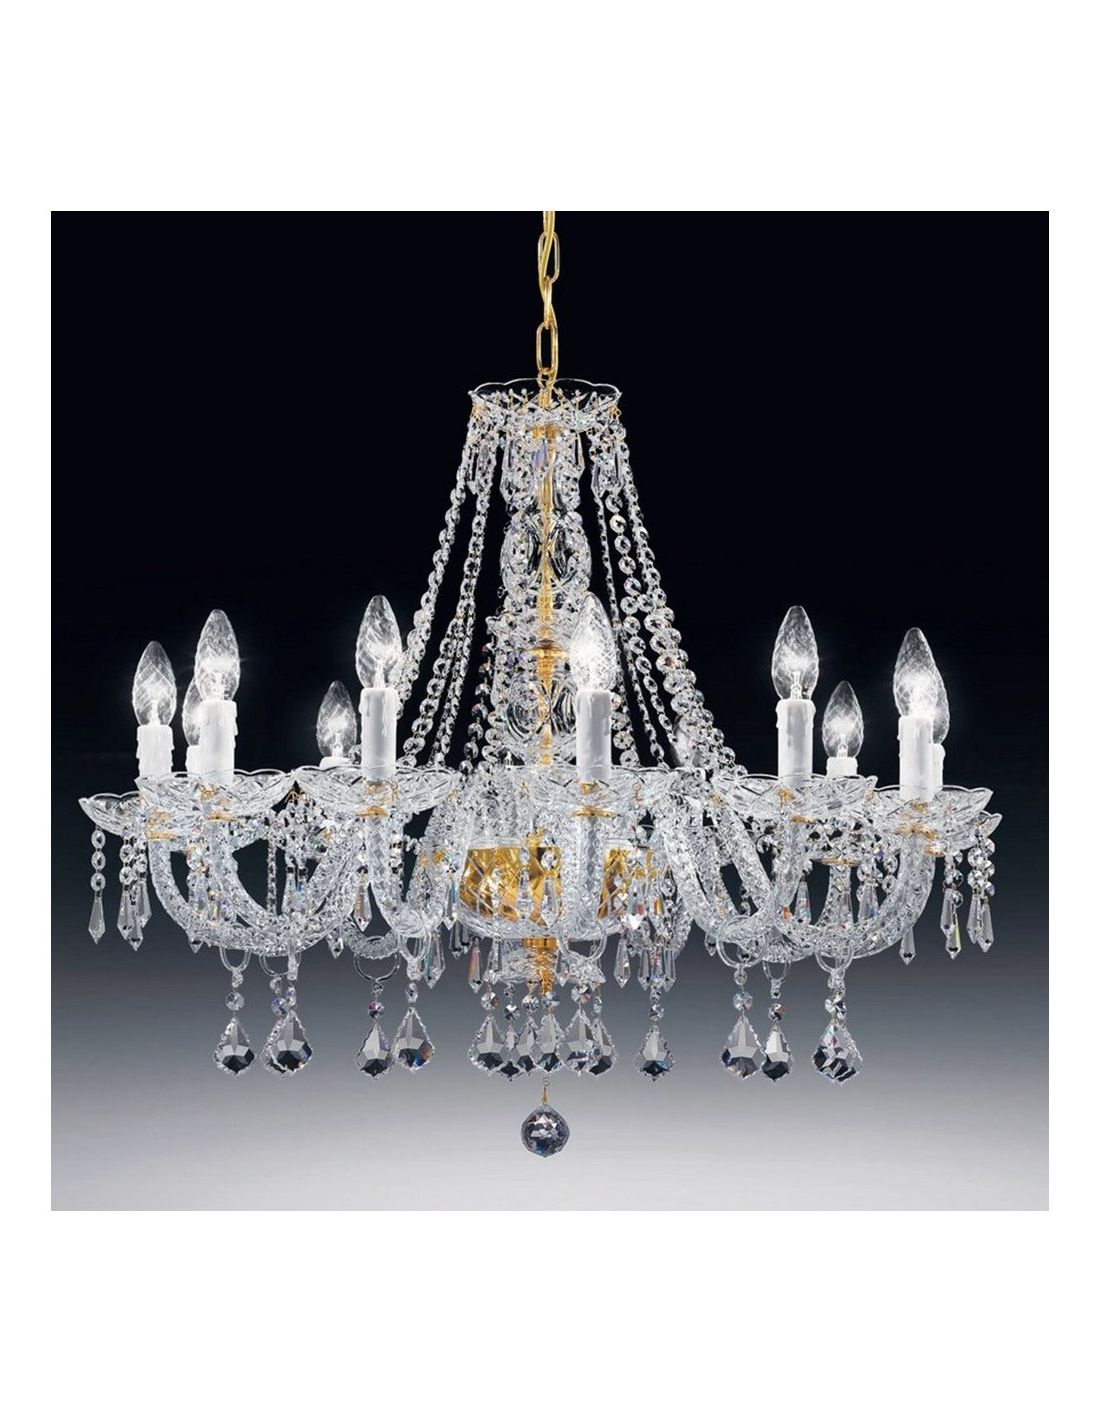 Transparent Glass Chandeliers Pertaining To 2020 Classic Transparent Crystal Chandelier Ll  (View 5 of 15)